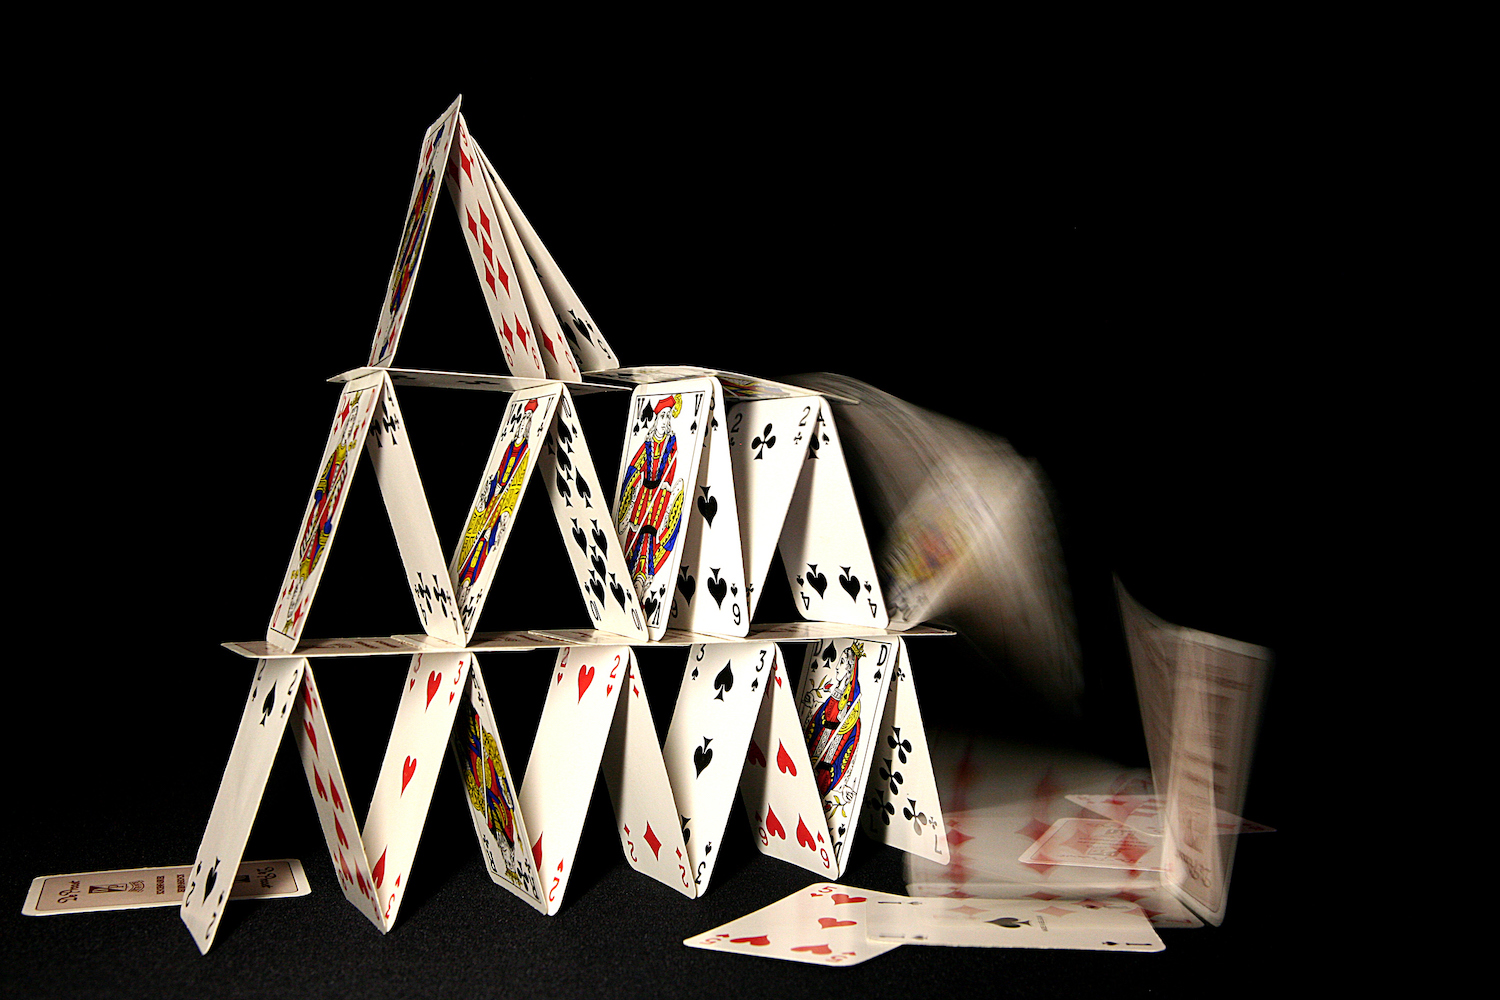 A house of cards collapsing on dark background